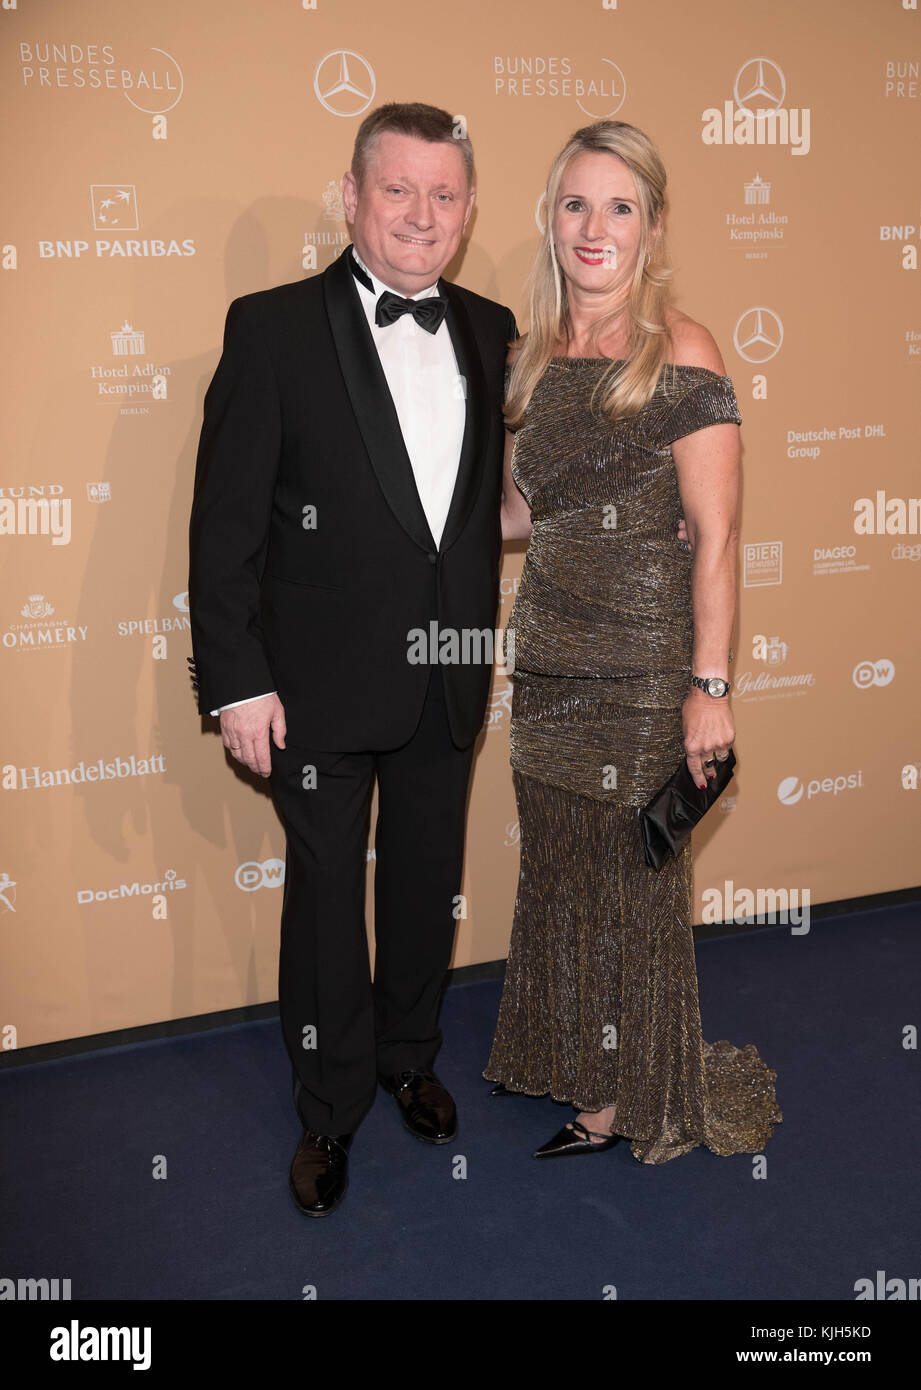 Berlin, Germany. 24th Nov, 2017. Federal Health Minister Hermann Groehe from the Christian Democratic Union (CDU) and his wife Heidi arrive for the German press ball at the Hotel Adlon in Berlin, Germany, 24 November 2017. Credit: Ralf Hirschberger/dpa/Alamy Live News Stock Photo